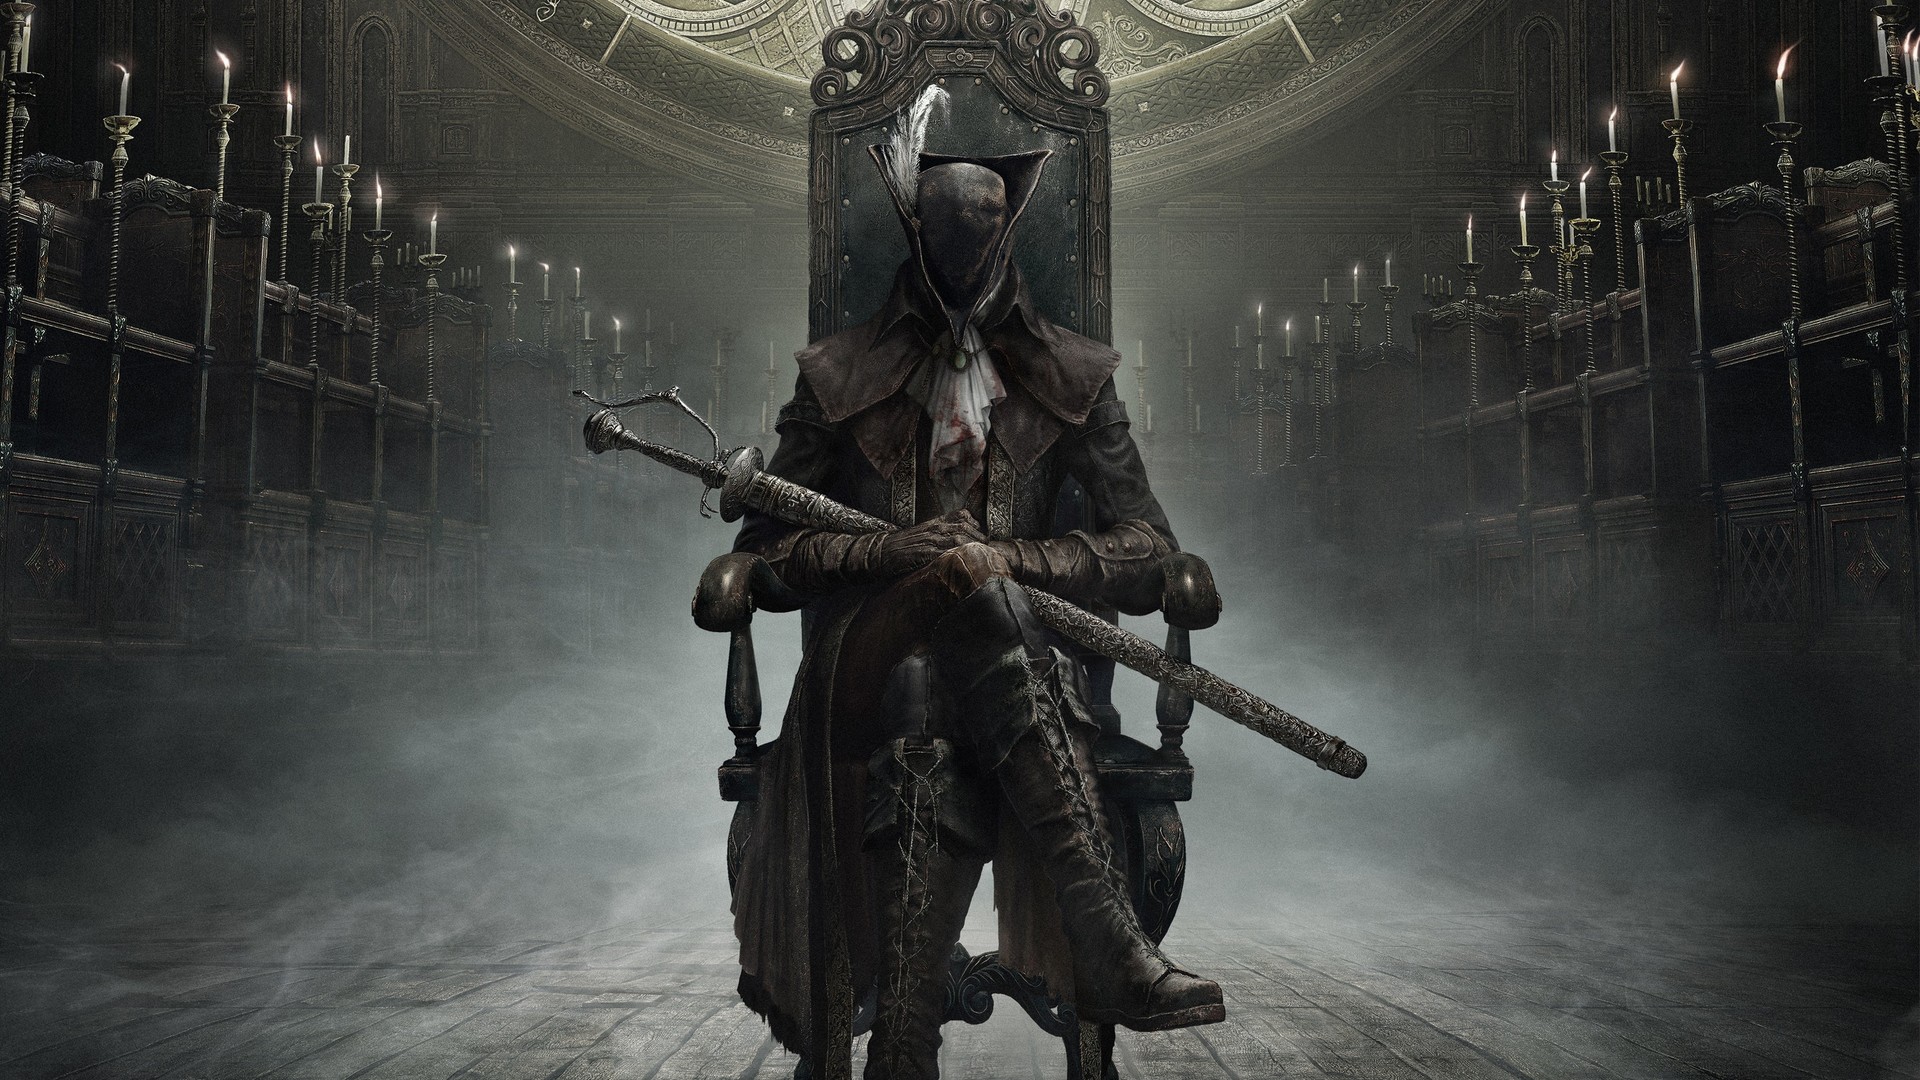 Bloodborne Now Available on PC via PlayStation Now, Project Cars and Others  Also Added